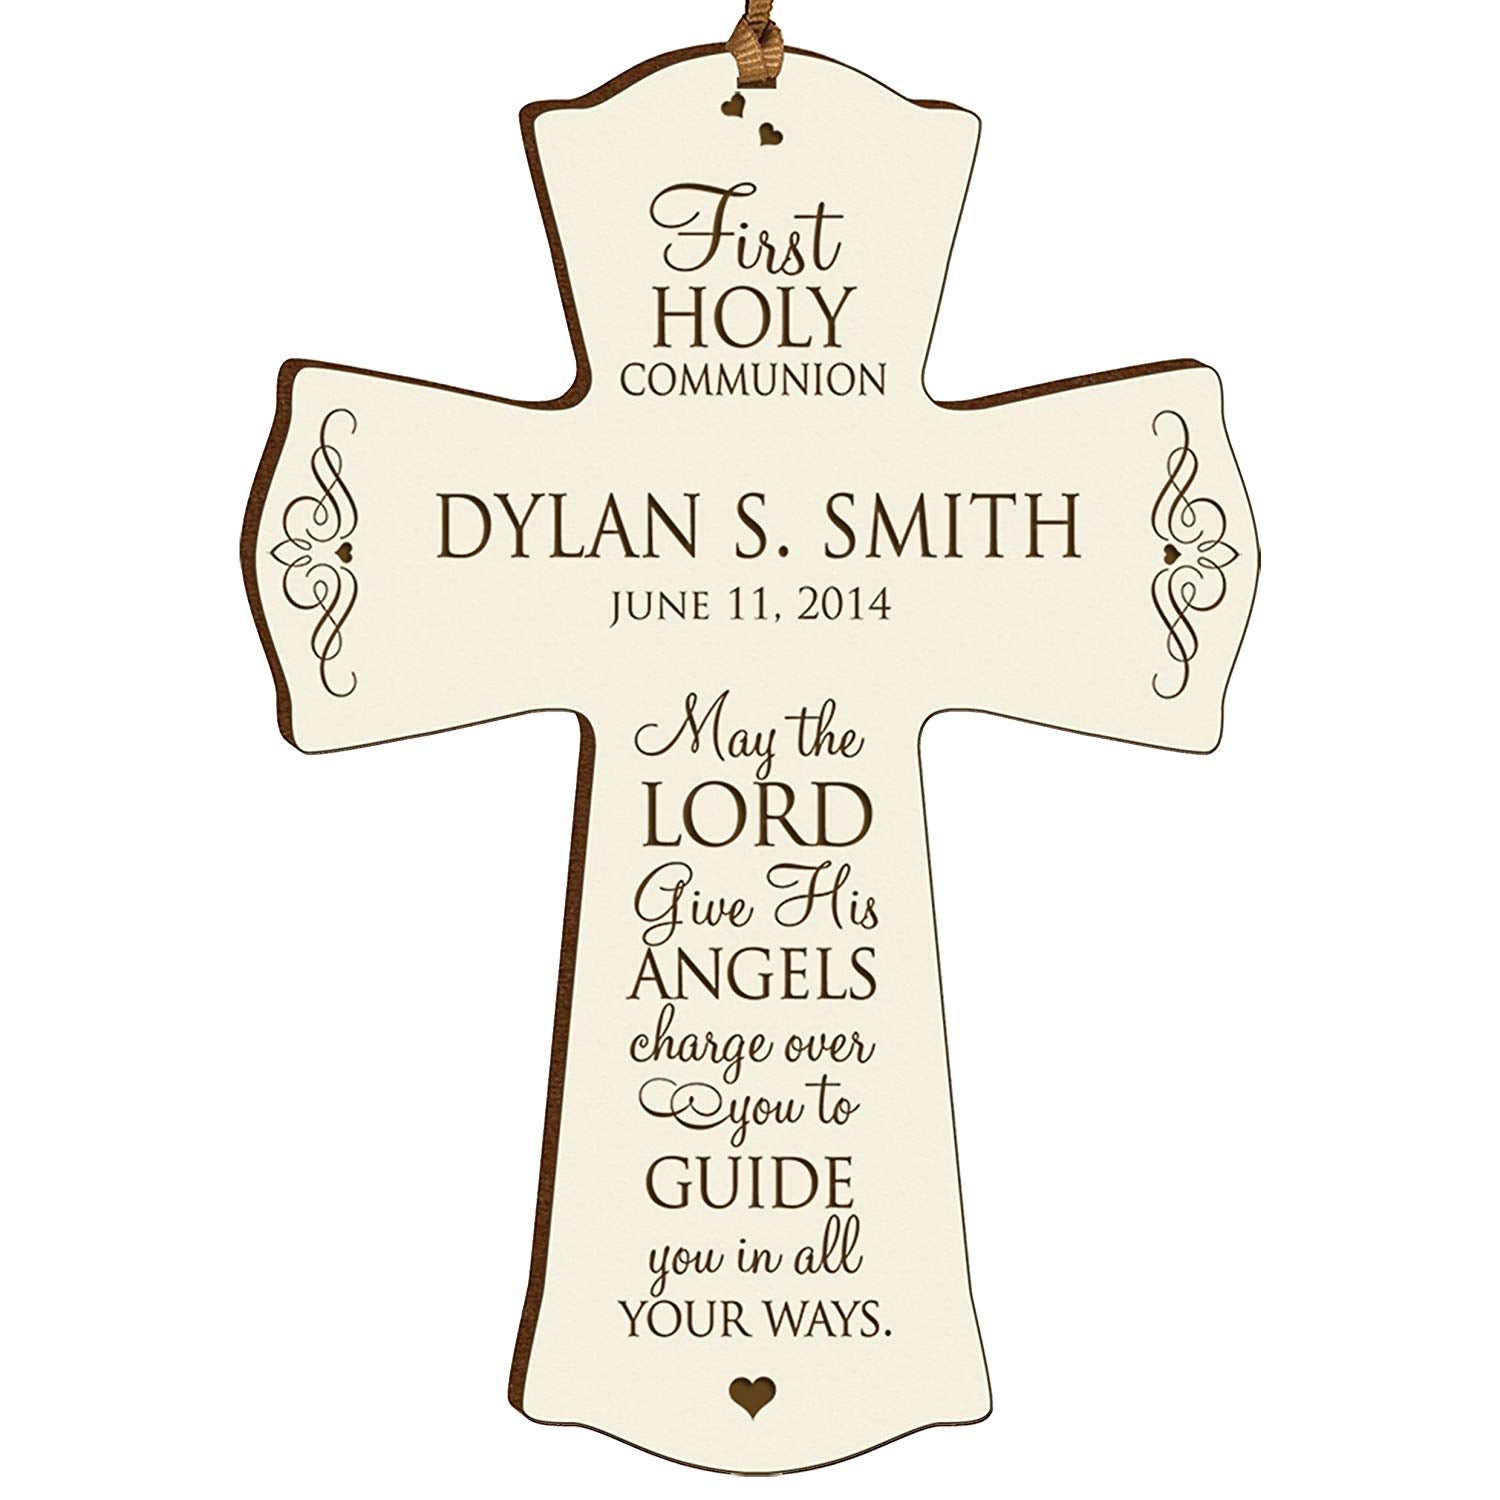 Personalized Baptism Wall Cross for Christening -First Holy Communion - LifeSong Milestones